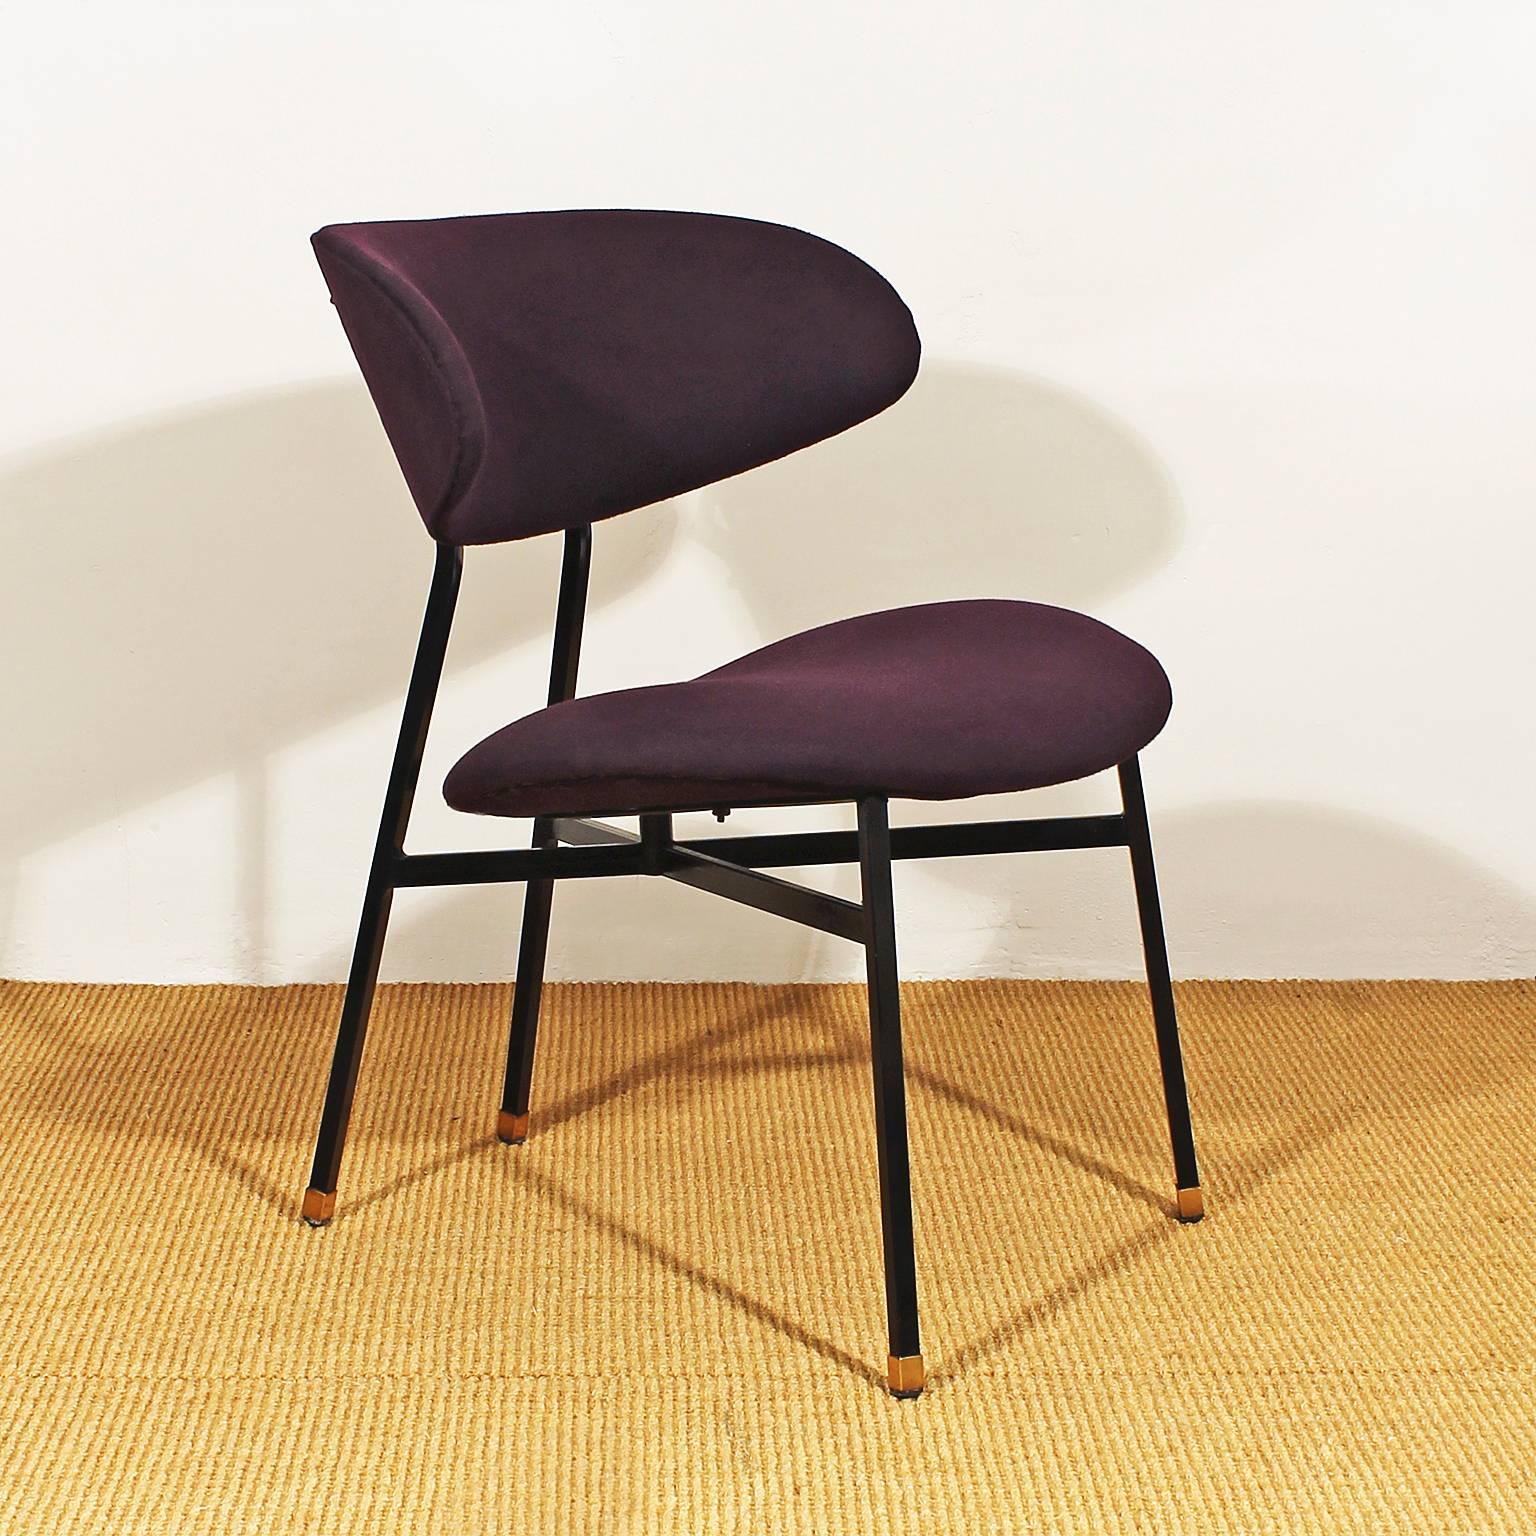 Mid-Century Modern 1950s Pair of Low Chairs, Iron, Brass, Violet Felt Upholstery, Italy